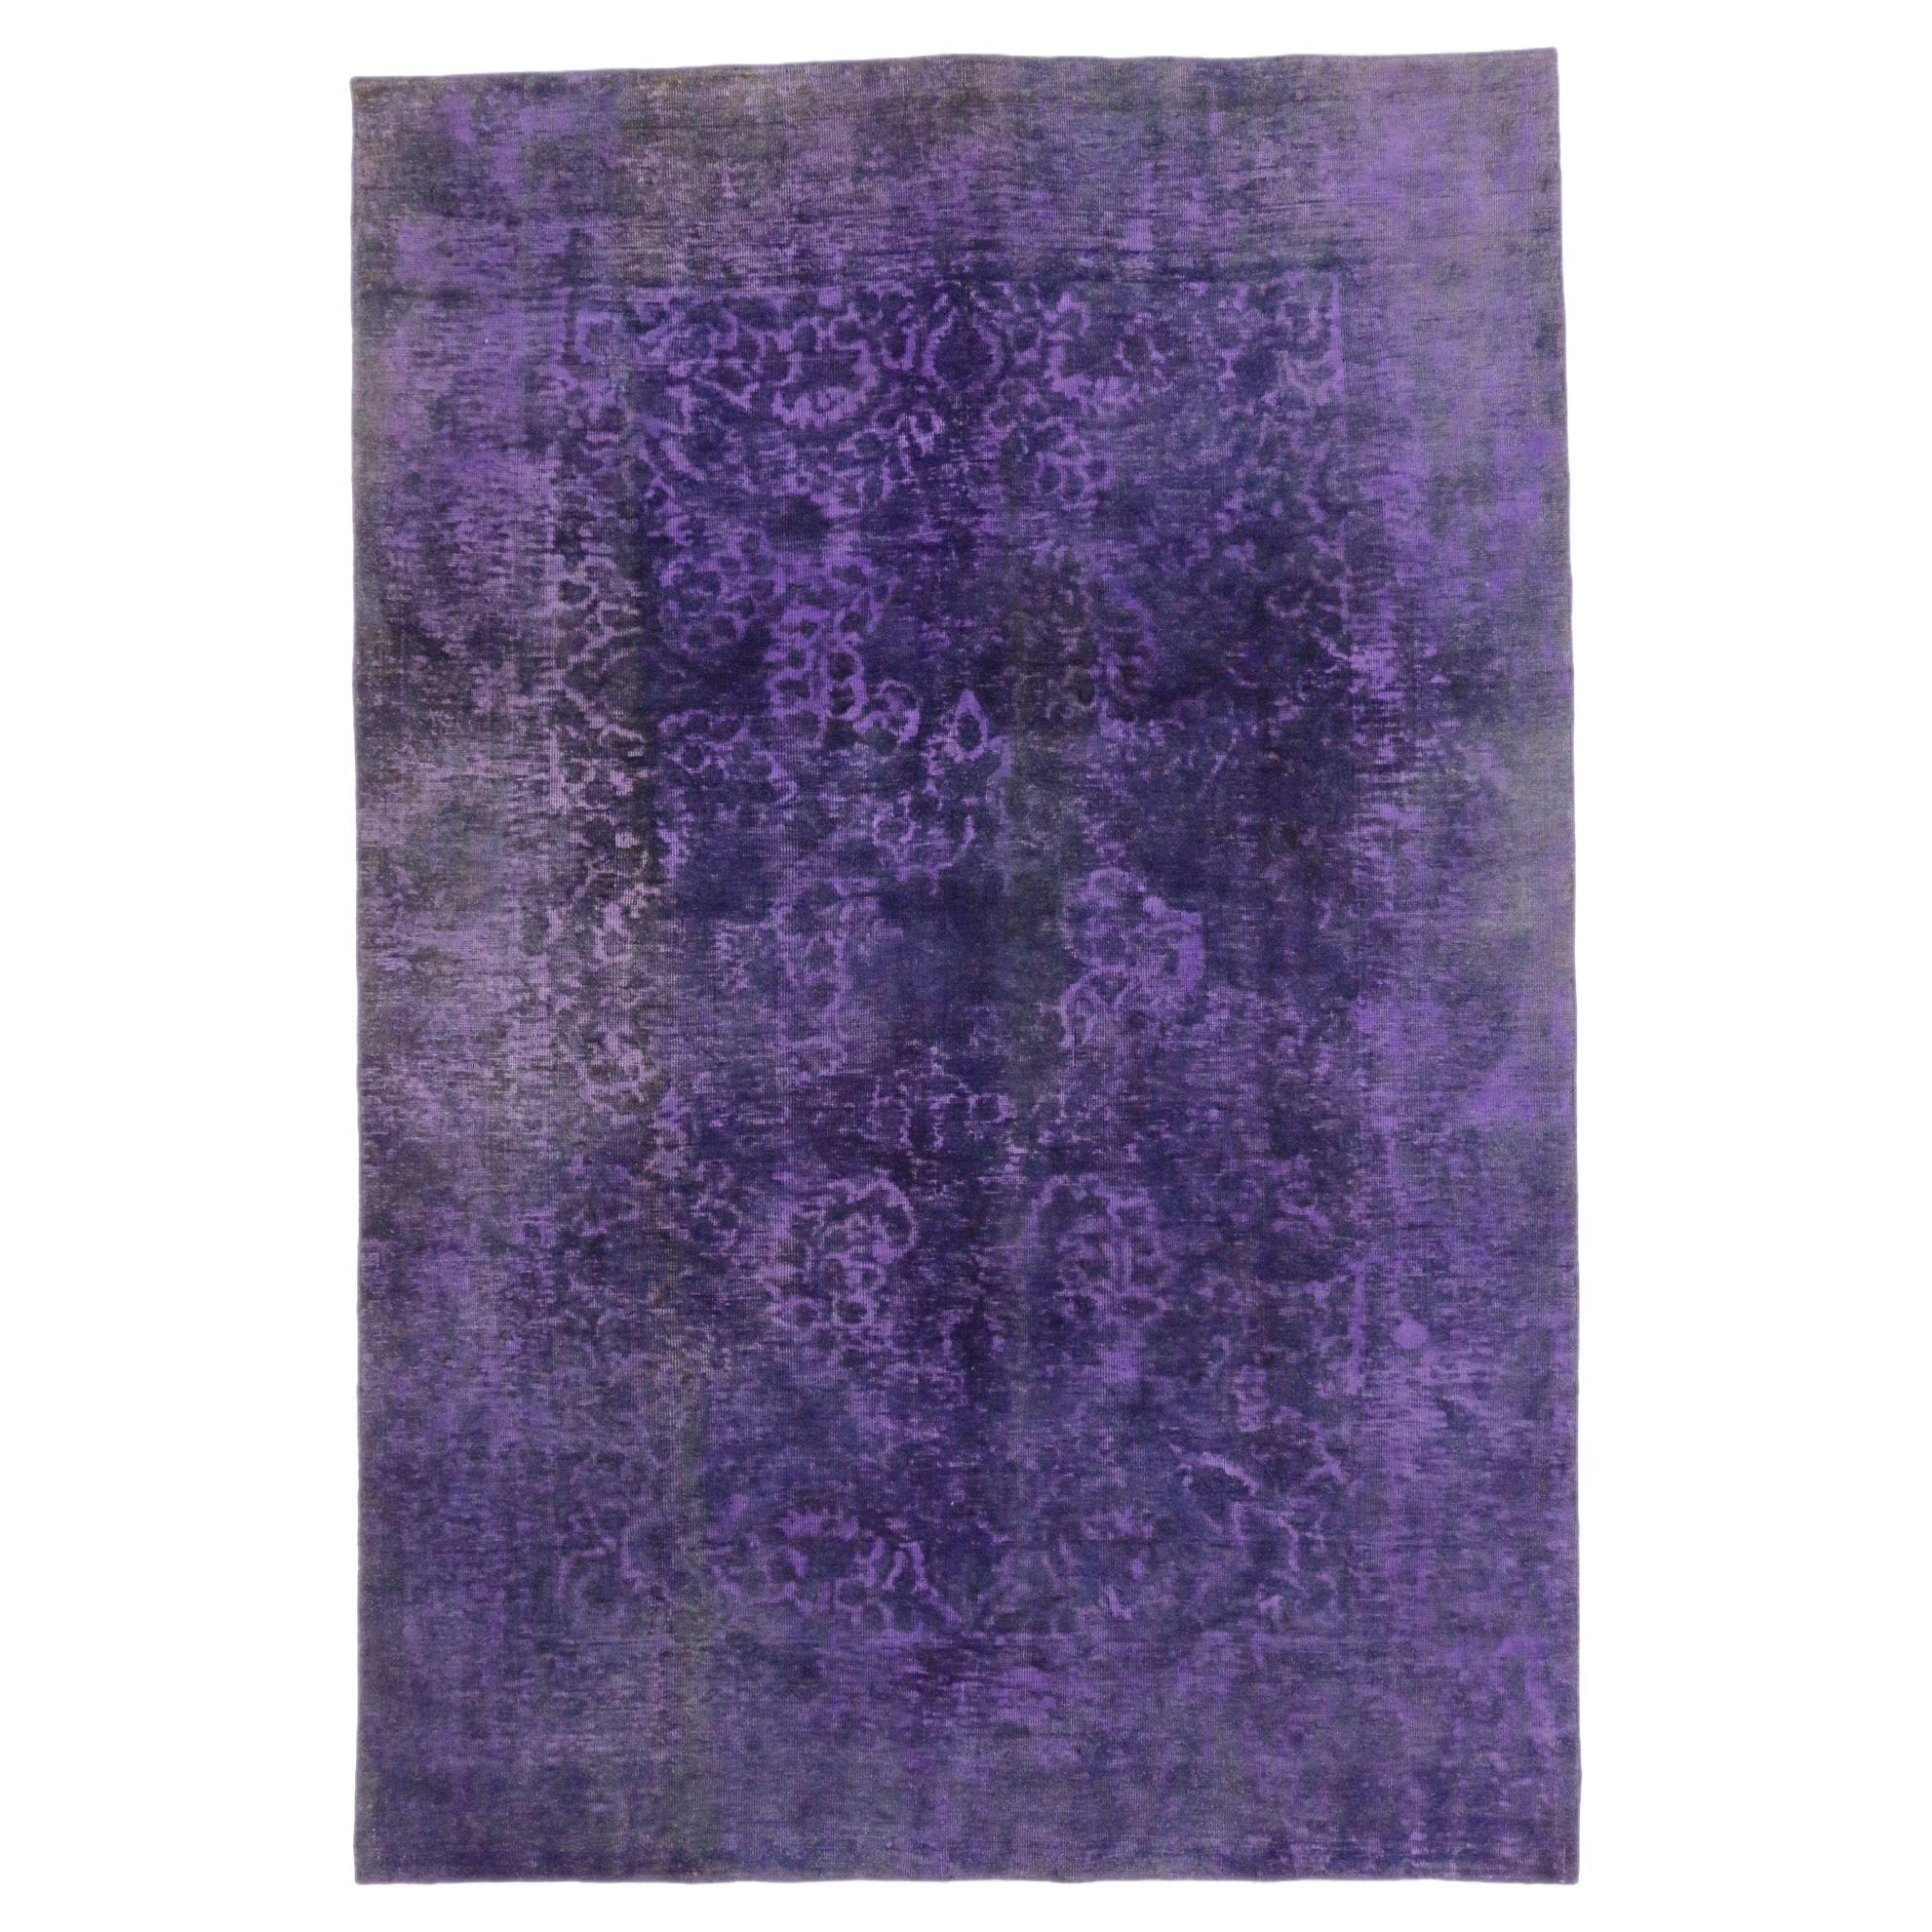 Vintage Turkish Purple Overdyed Rug, Bohemian Rhapsody Meets Maximalist Style For Sale